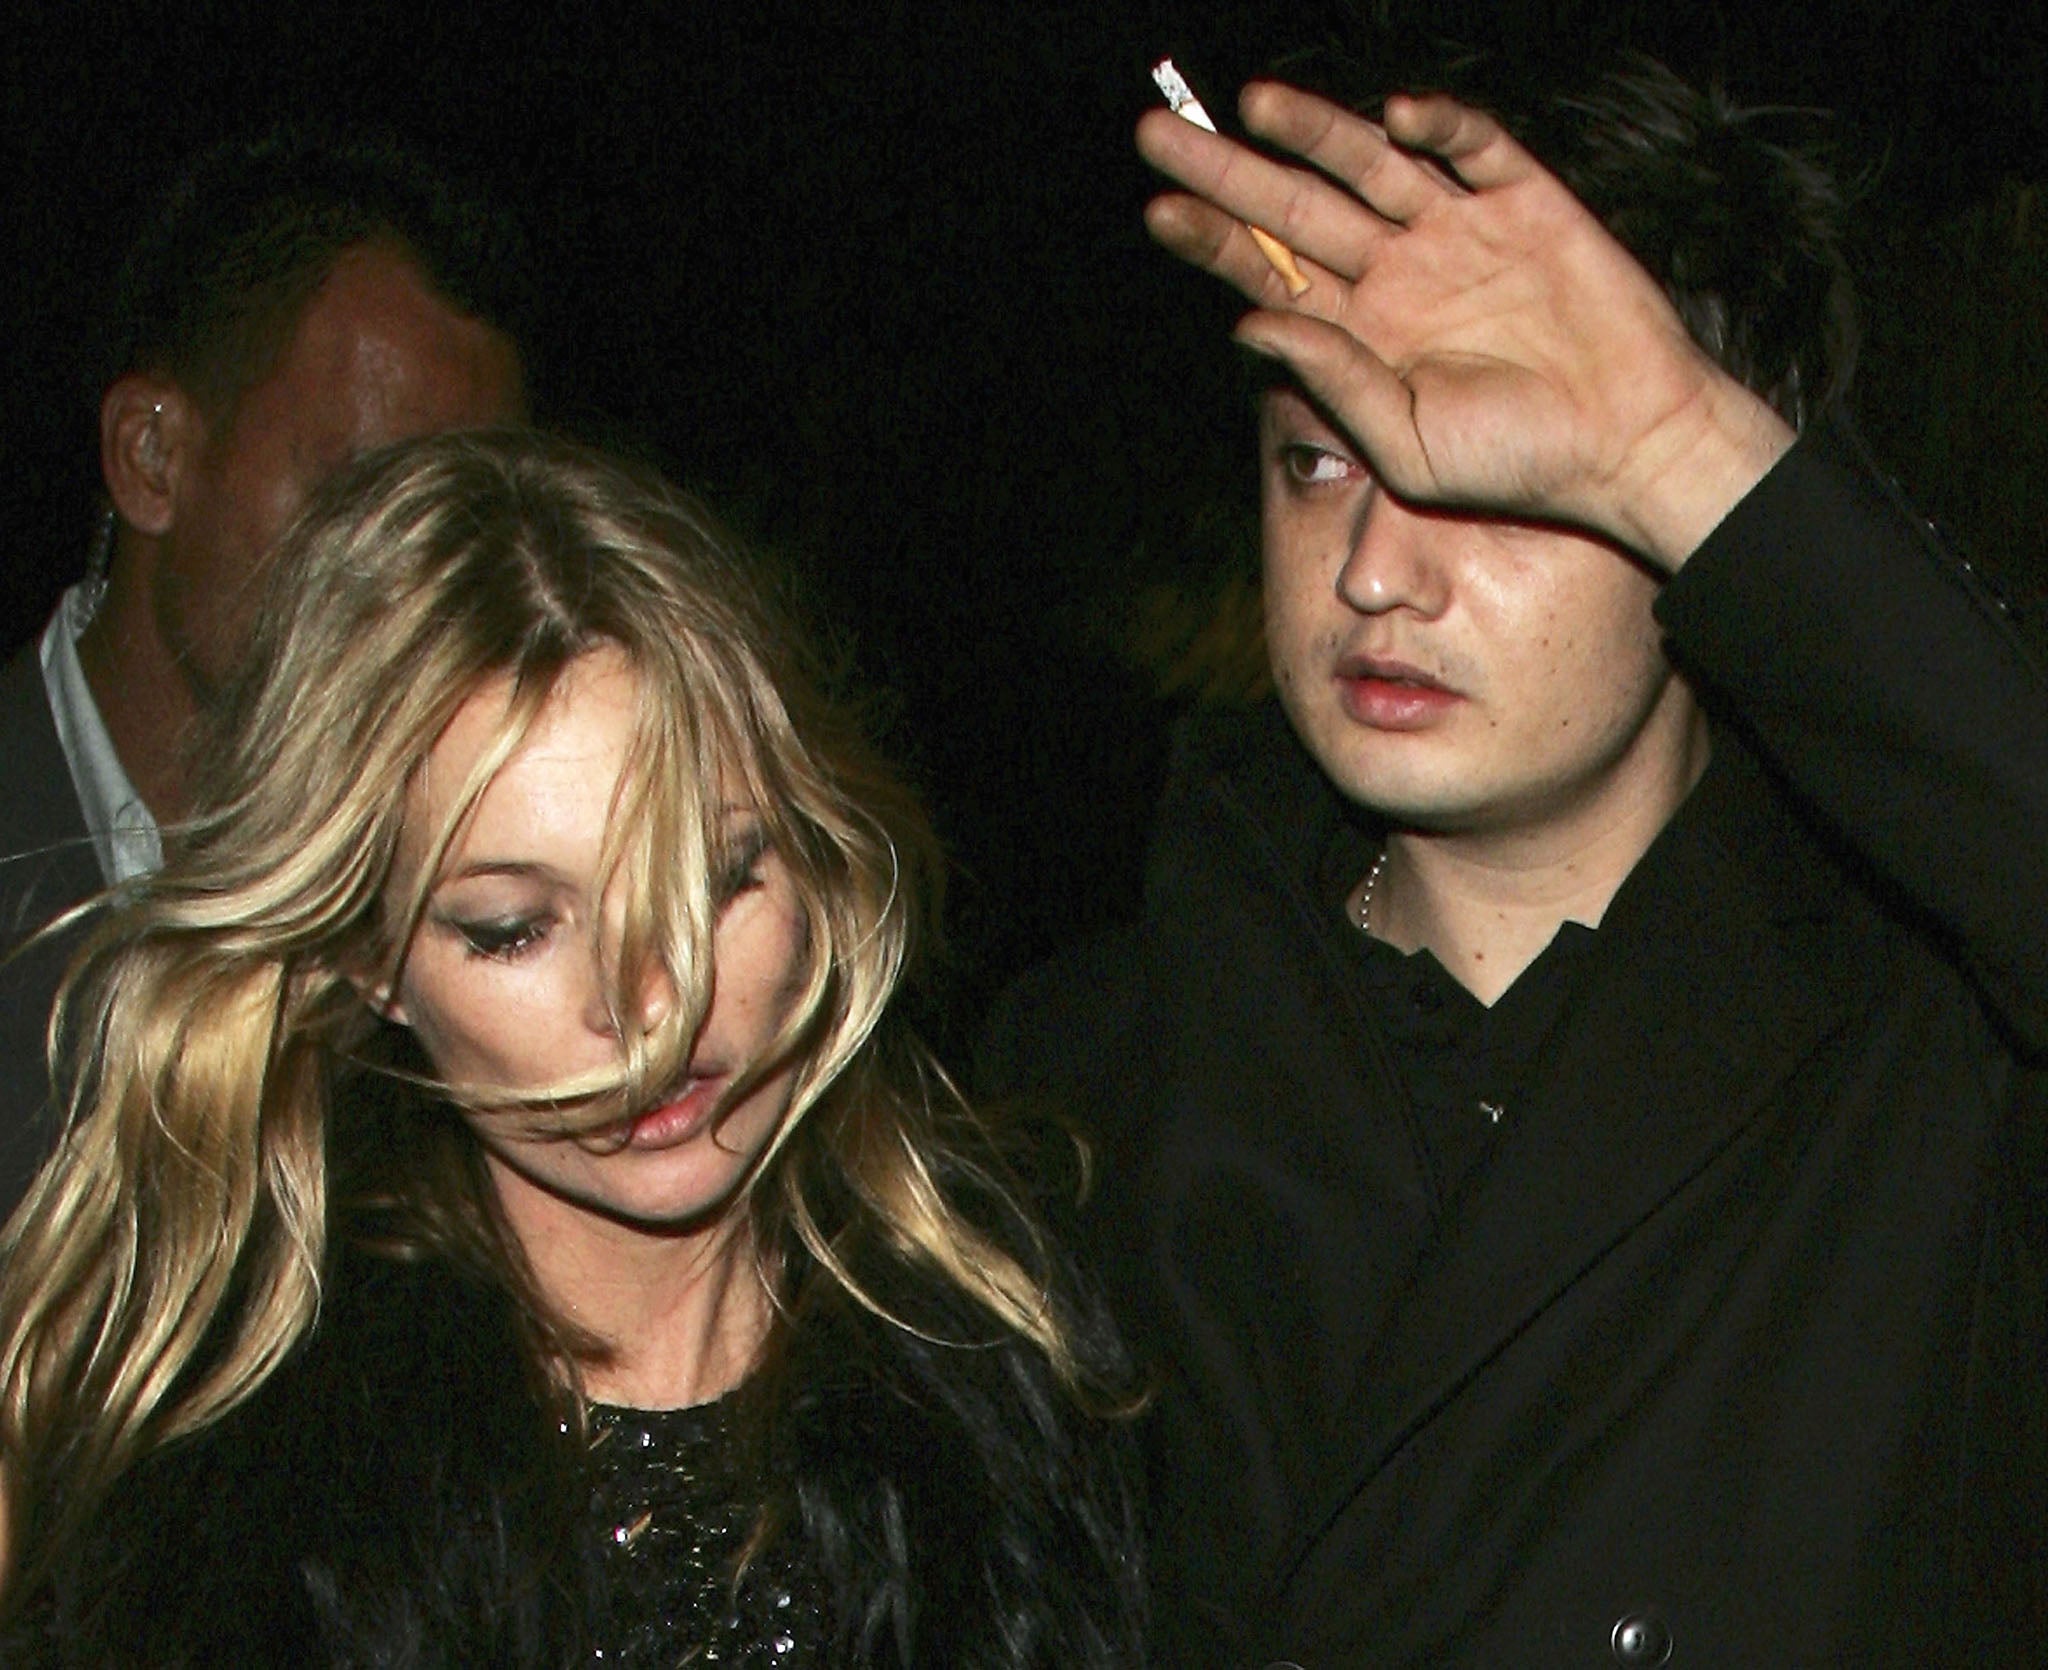 Kate Moss and Pete Doherty when they were having a relationship in 2006